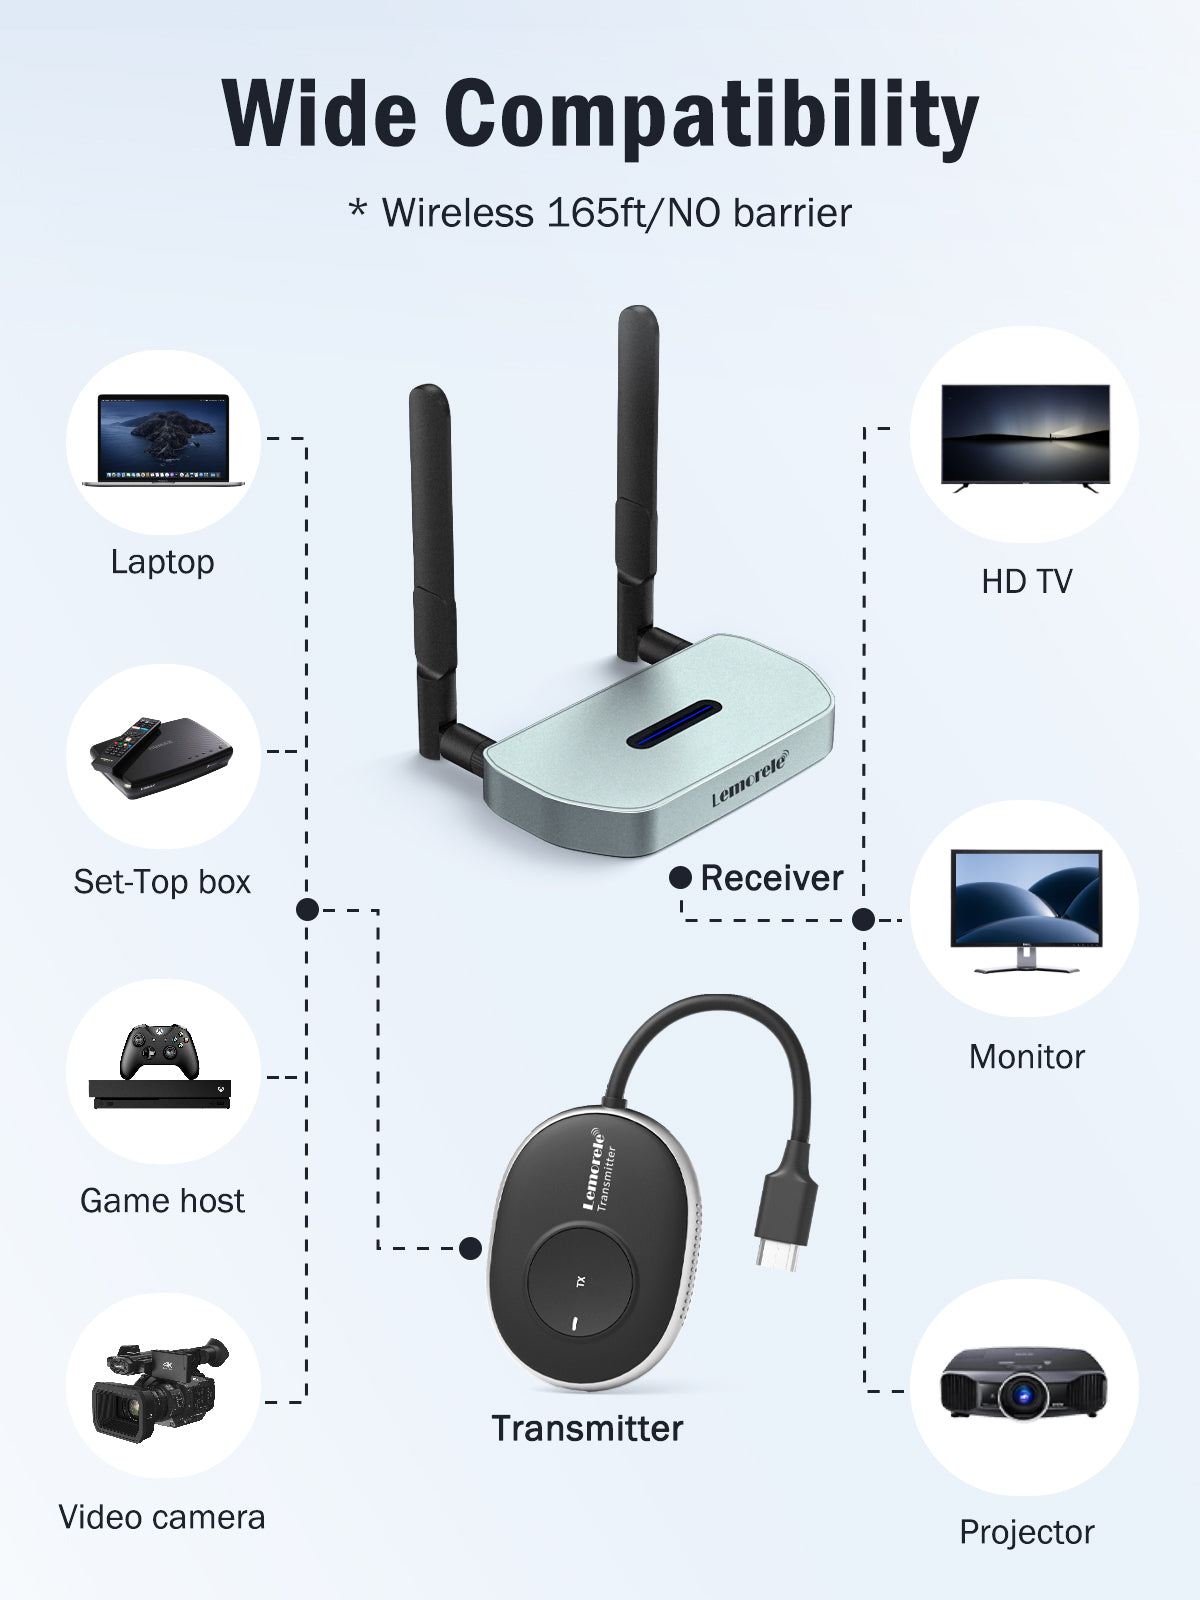 Lemorele HDMI Wireless Extender Streaming Video Kit for Switch,PS4 Laptop to HDTV/Projector/Monitor 【Q5R1-HDMI】